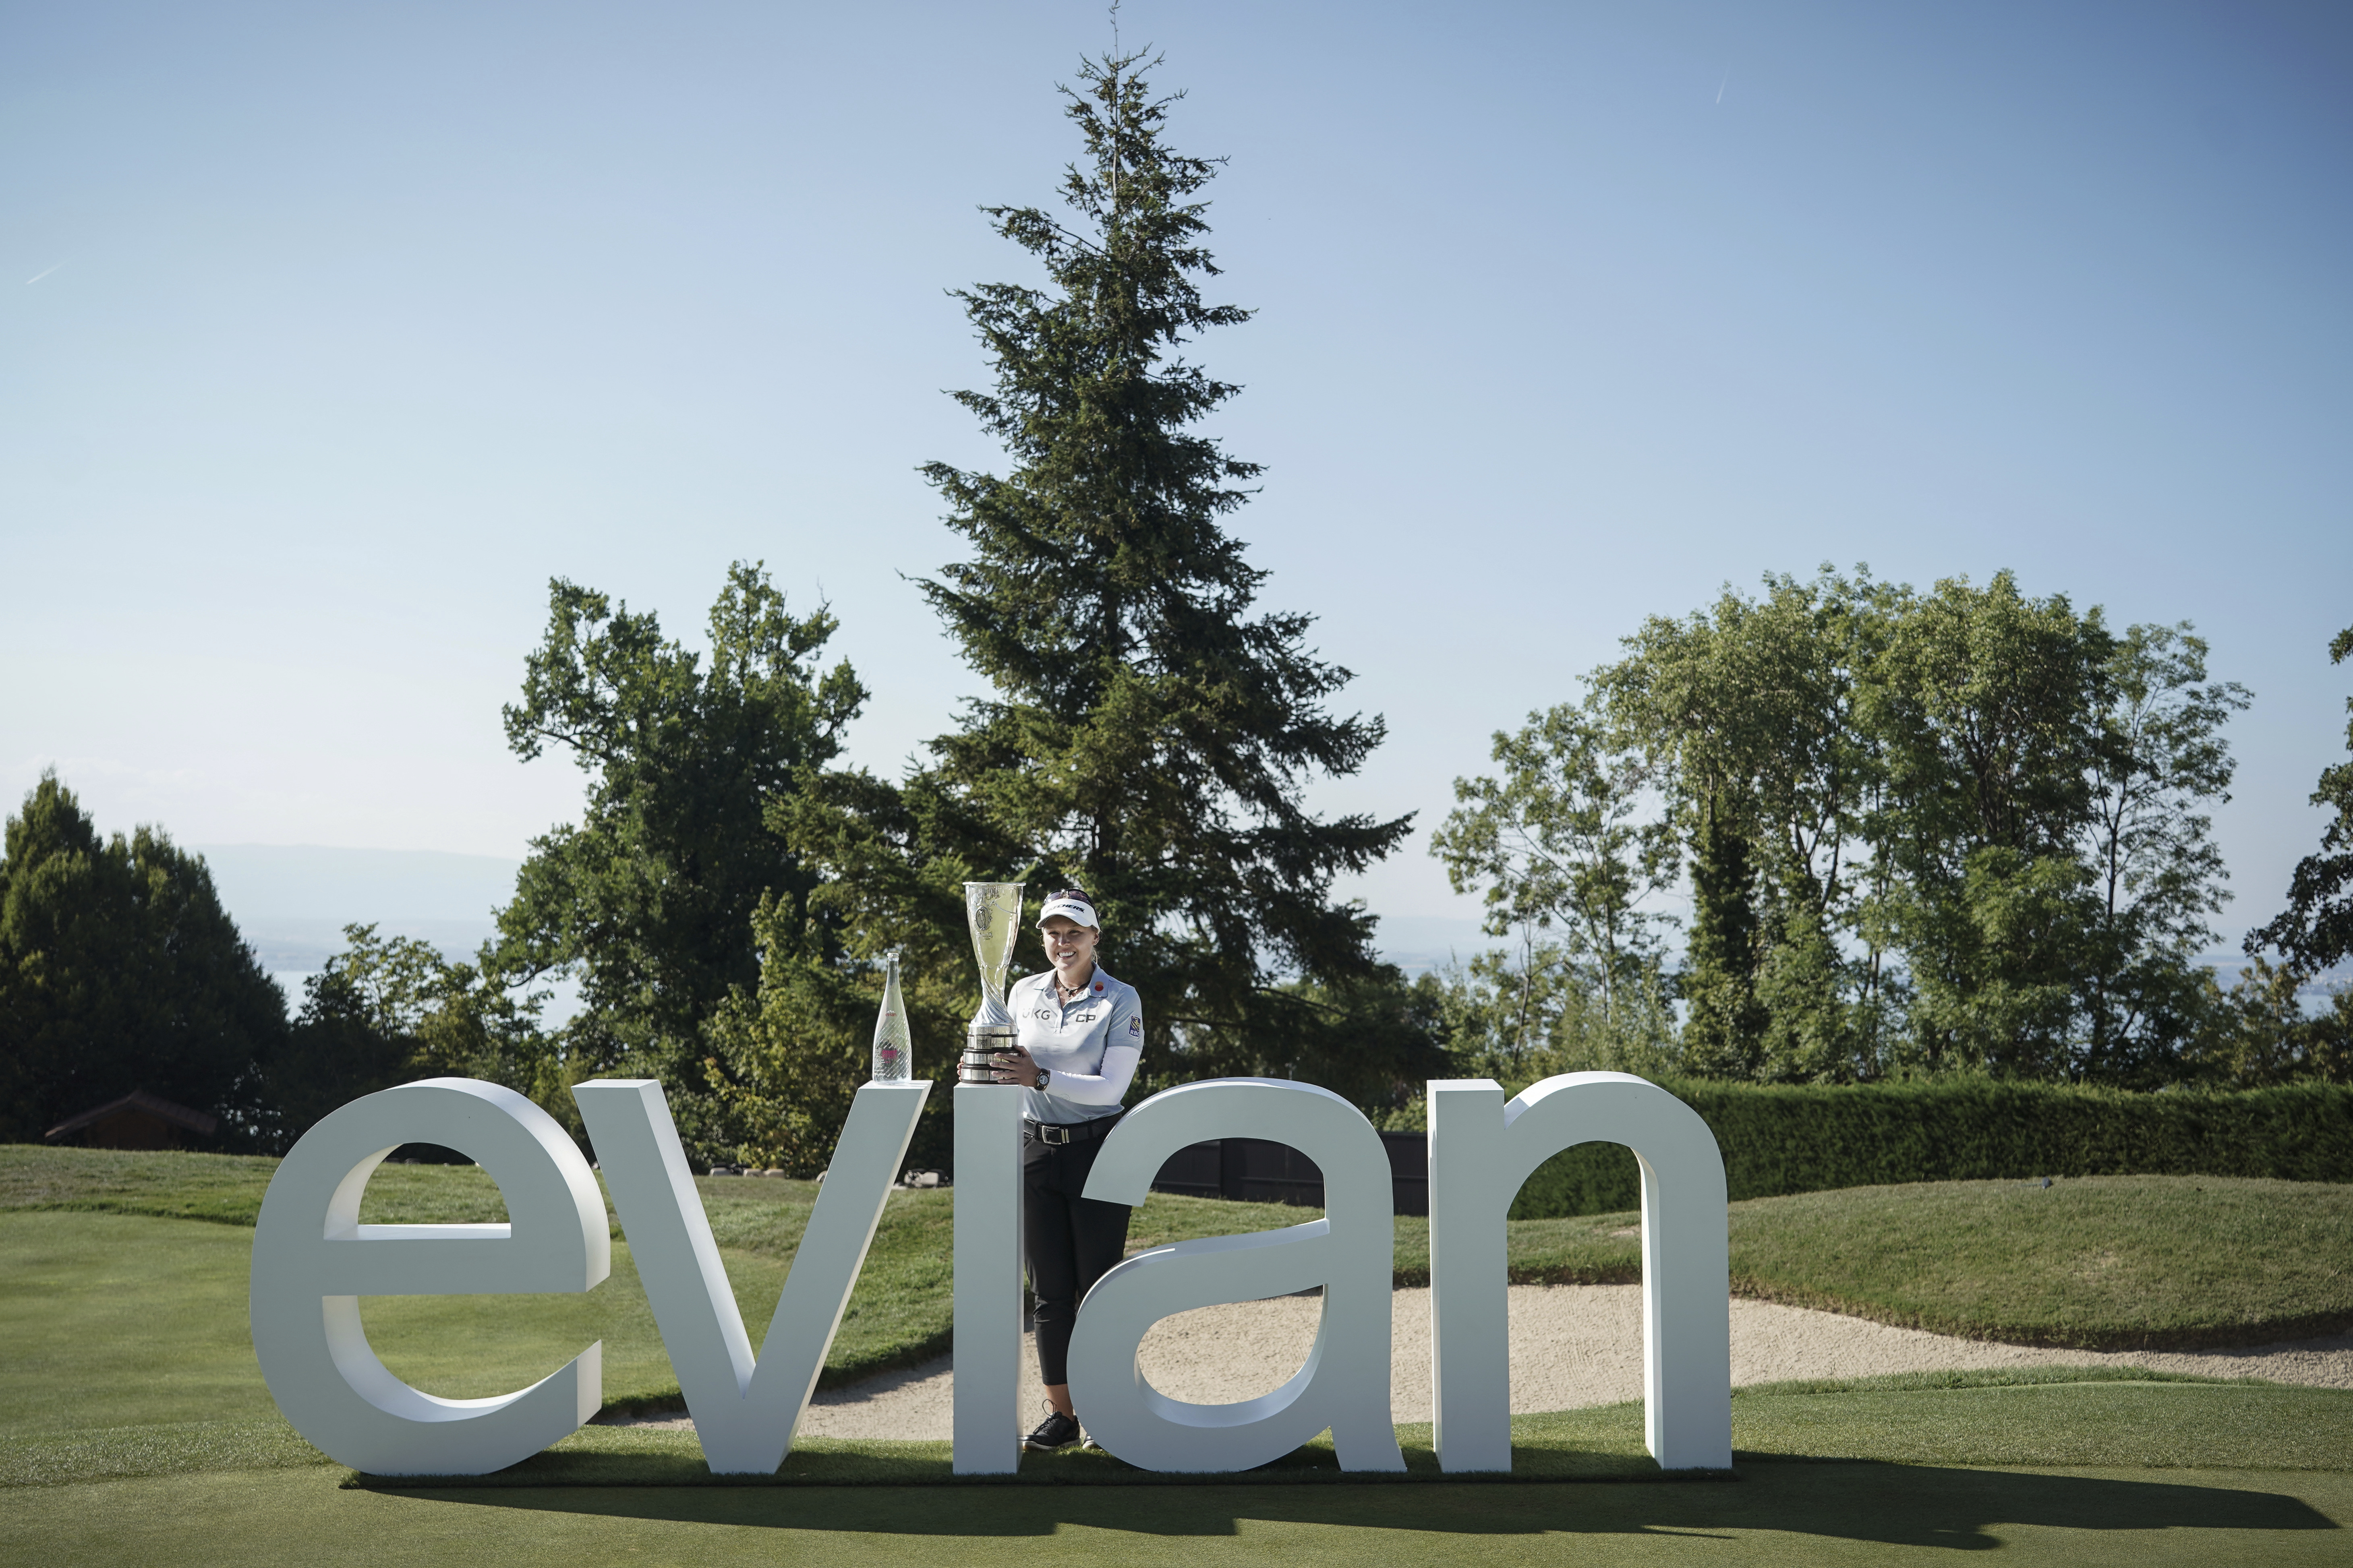 How to Watch the 2023 Evian Championship Full schedule, channel listing, preview